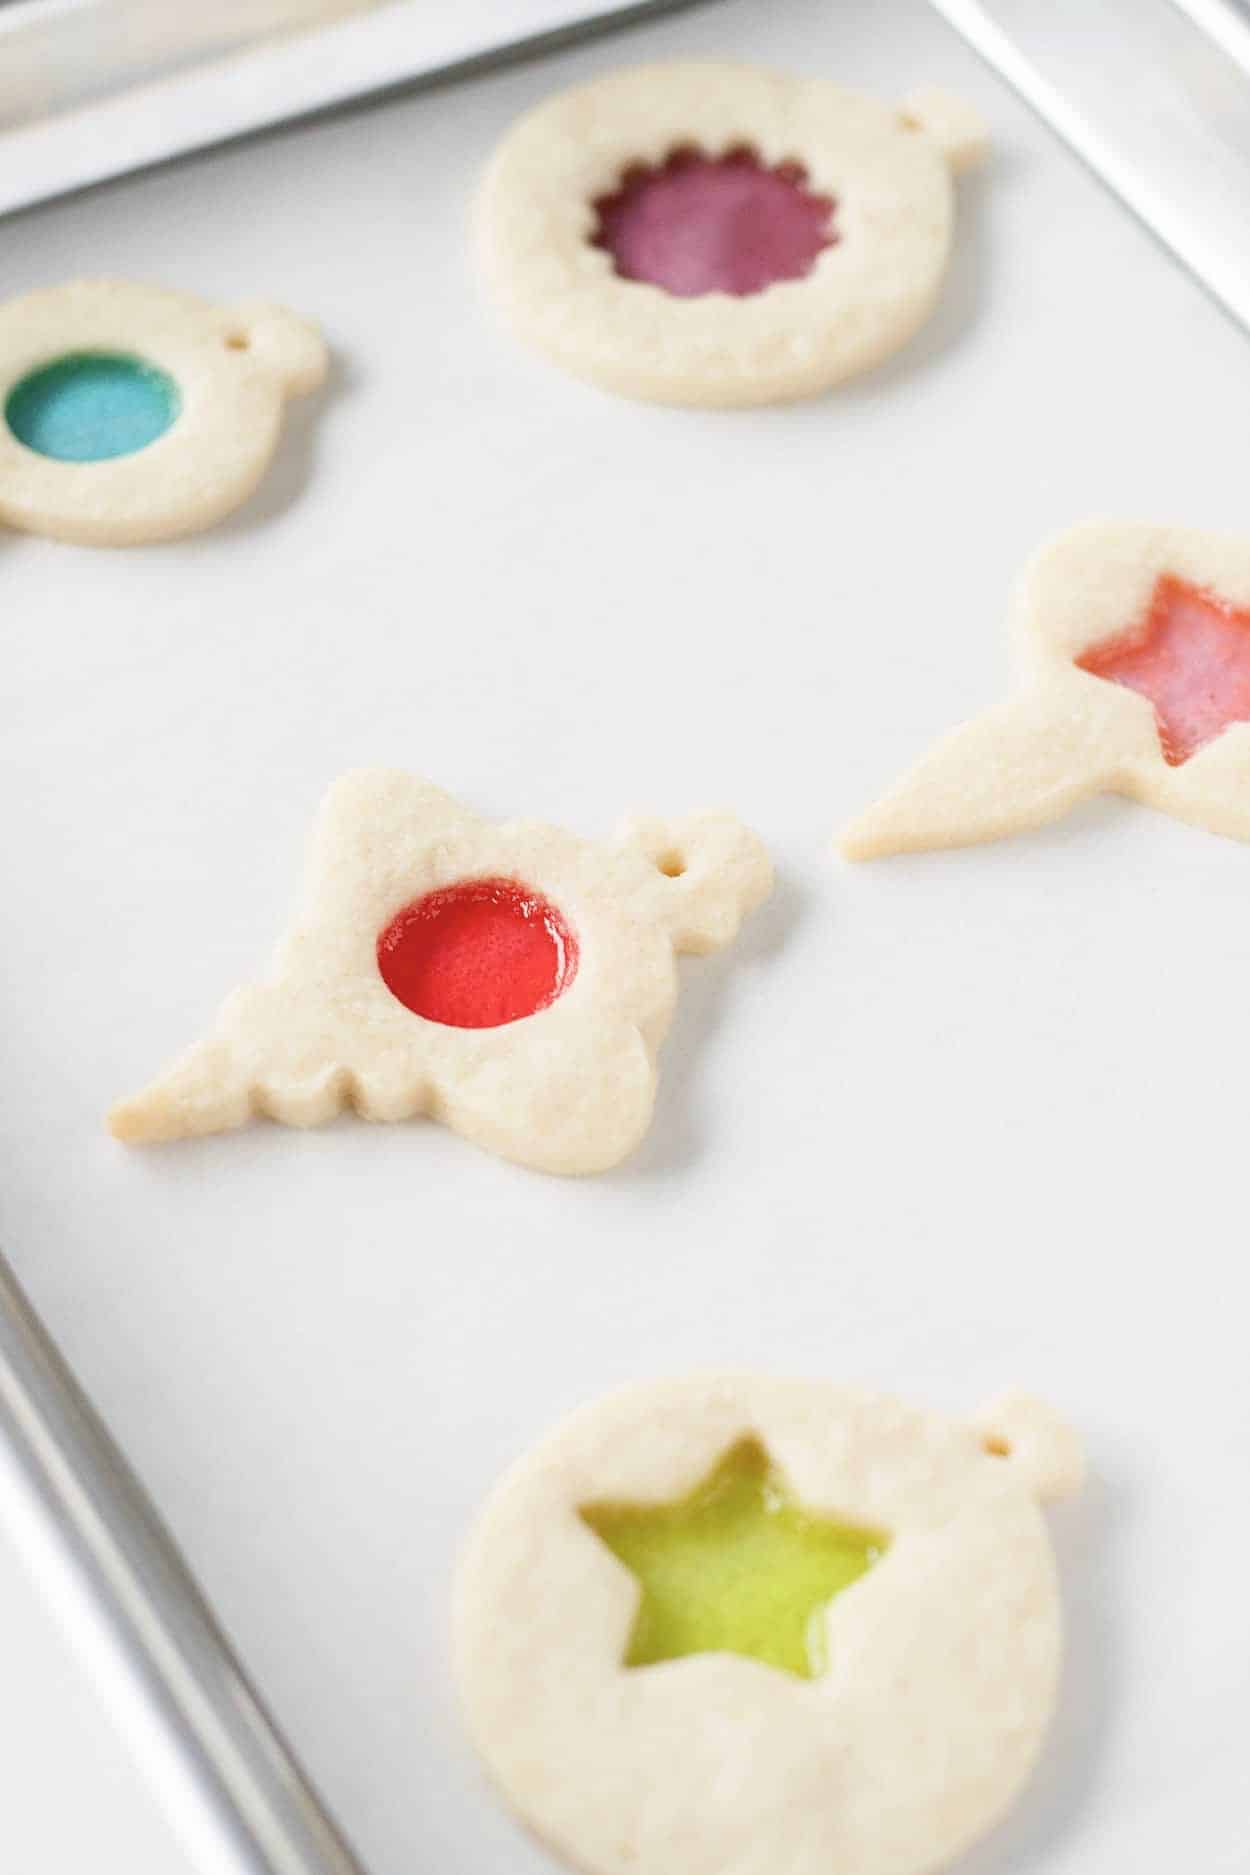 Baked stained glass cookies on a baking sheet.